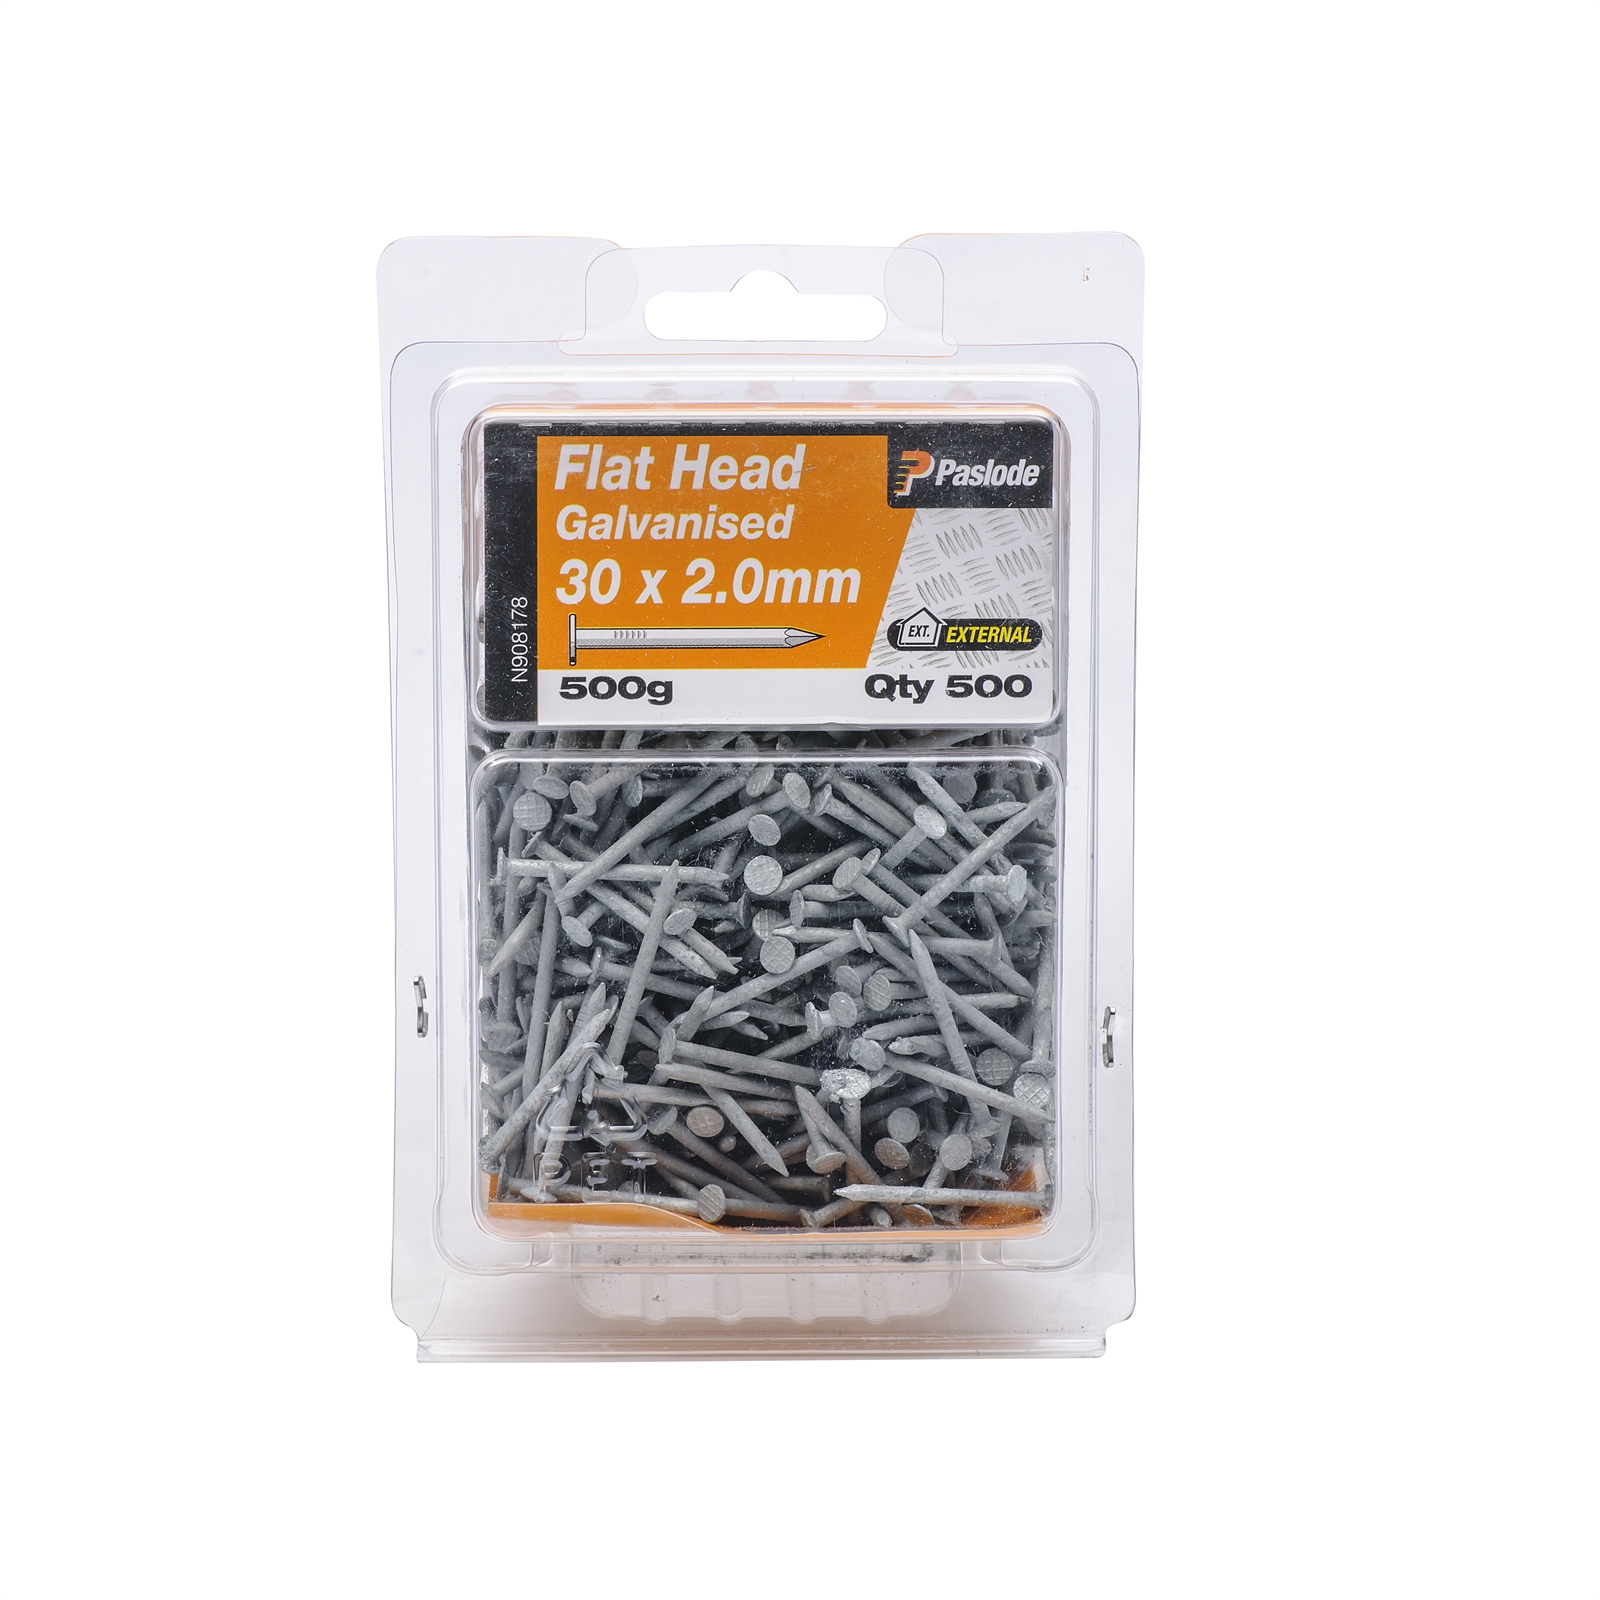 Paslode 30 x 2.0mm 500g Galvanised Flat Head Nails - 500 Pack